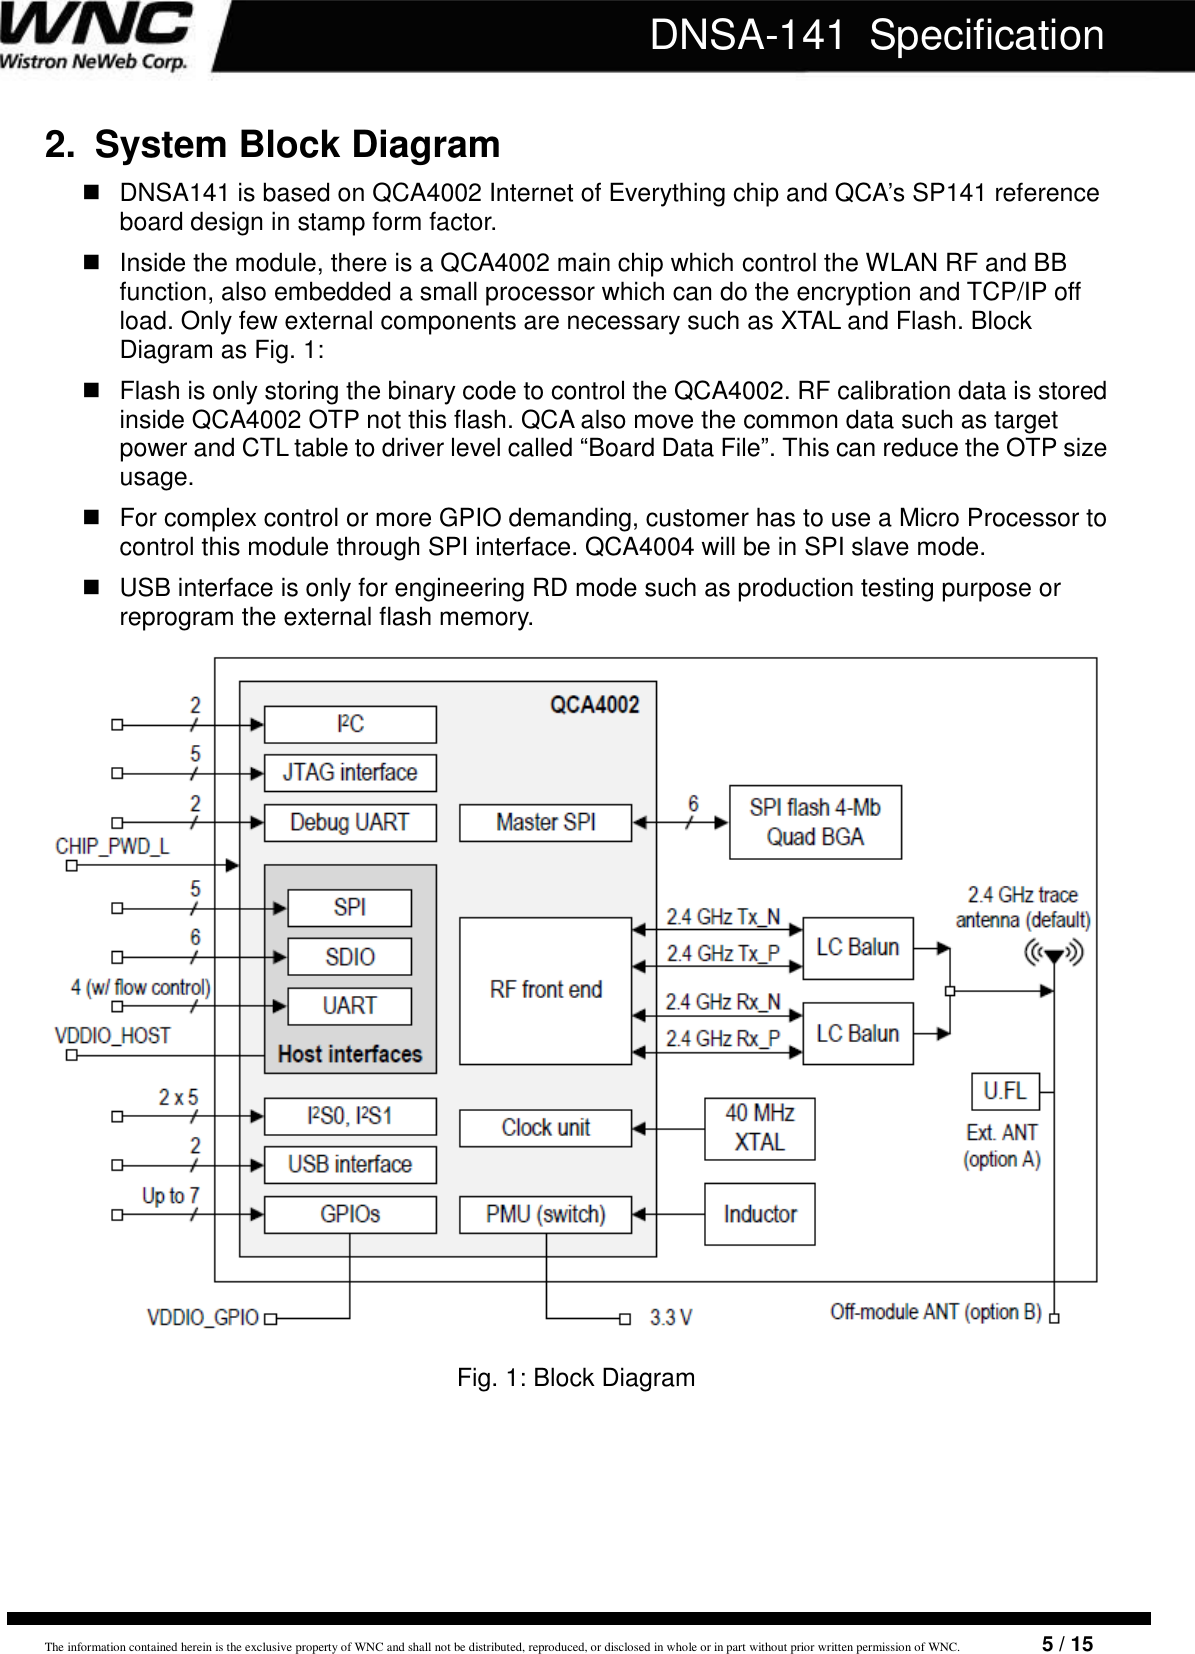   The information contained herein is the exclusive property of WNC and shall not be distributed, reproduced, or disclosed in whole or in part without prior written permission of WNC.                        5 / 15 DNSA-141  Specification 2.  System Block Diagram   DNSA141 is based on QCA4002 Internet of Everything chip and QCA’s SP141 reference board design in stamp form factor.   Inside the module, there is a QCA4002 main chip which control the WLAN RF and BB function, also embedded a small processor which can do the encryption and TCP/IP off load. Only few external components are necessary such as XTAL and Flash. Block Diagram as Fig. 1:   Flash is only storing the binary code to control the QCA4002. RF calibration data is stored inside QCA4002 OTP not this flash. QCA also move the common data such as target power and CTL table to driver level called “Board Data File”. This can reduce the OTP size usage.   For complex control or more GPIO demanding, customer has to use a Micro Processor to control this module through SPI interface. QCA4004 will be in SPI slave mode.   USB interface is only for engineering RD mode such as production testing purpose or reprogram the external flash memory.   Fig. 1: Block Diagram 